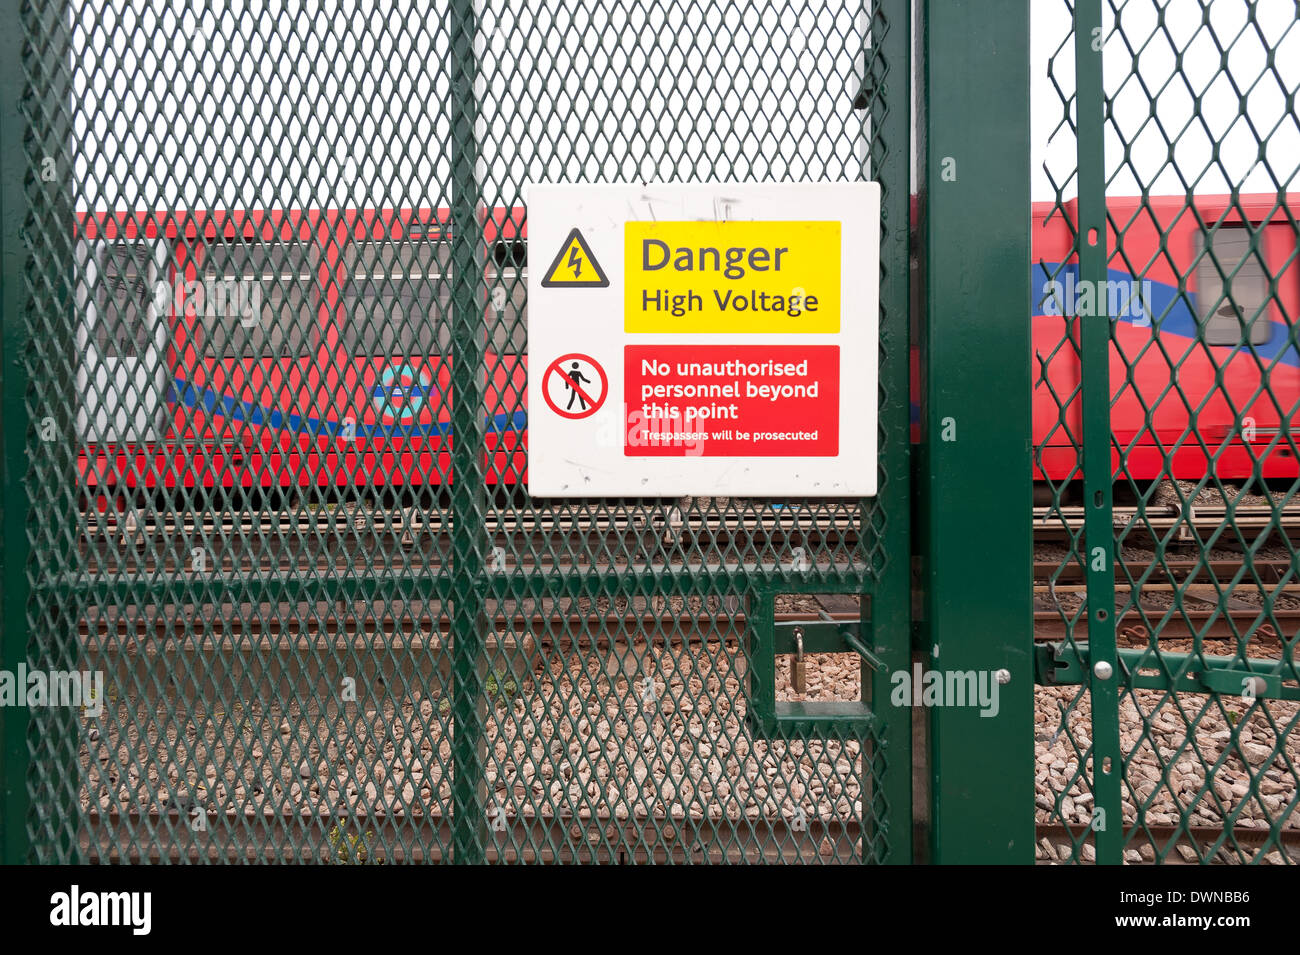 Danger high voltage only safe railway crossing is a closed one risk of  electrocution security fencing DLR trainline Stock Photo - Alamy